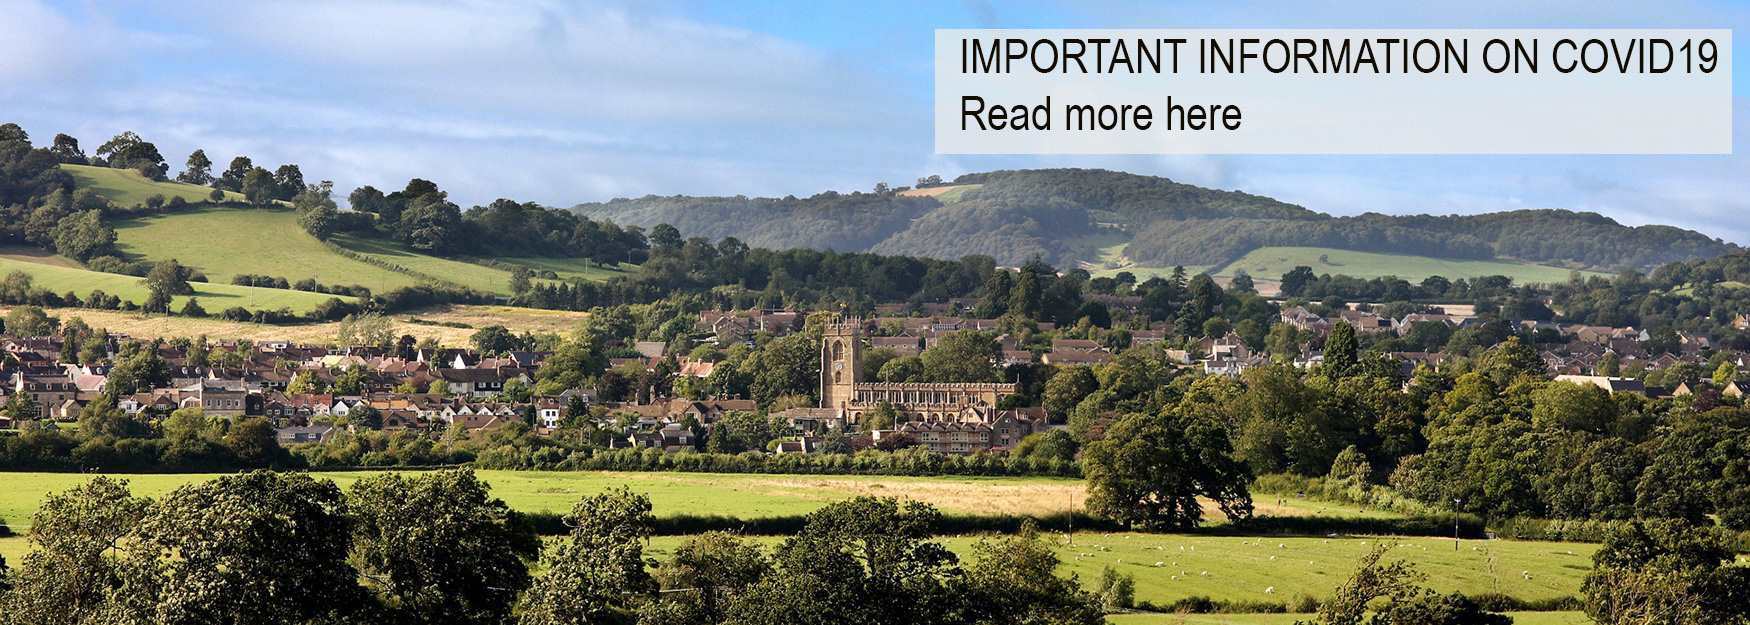 Winchcombe - 'Walking Capital of the Cotswolds'